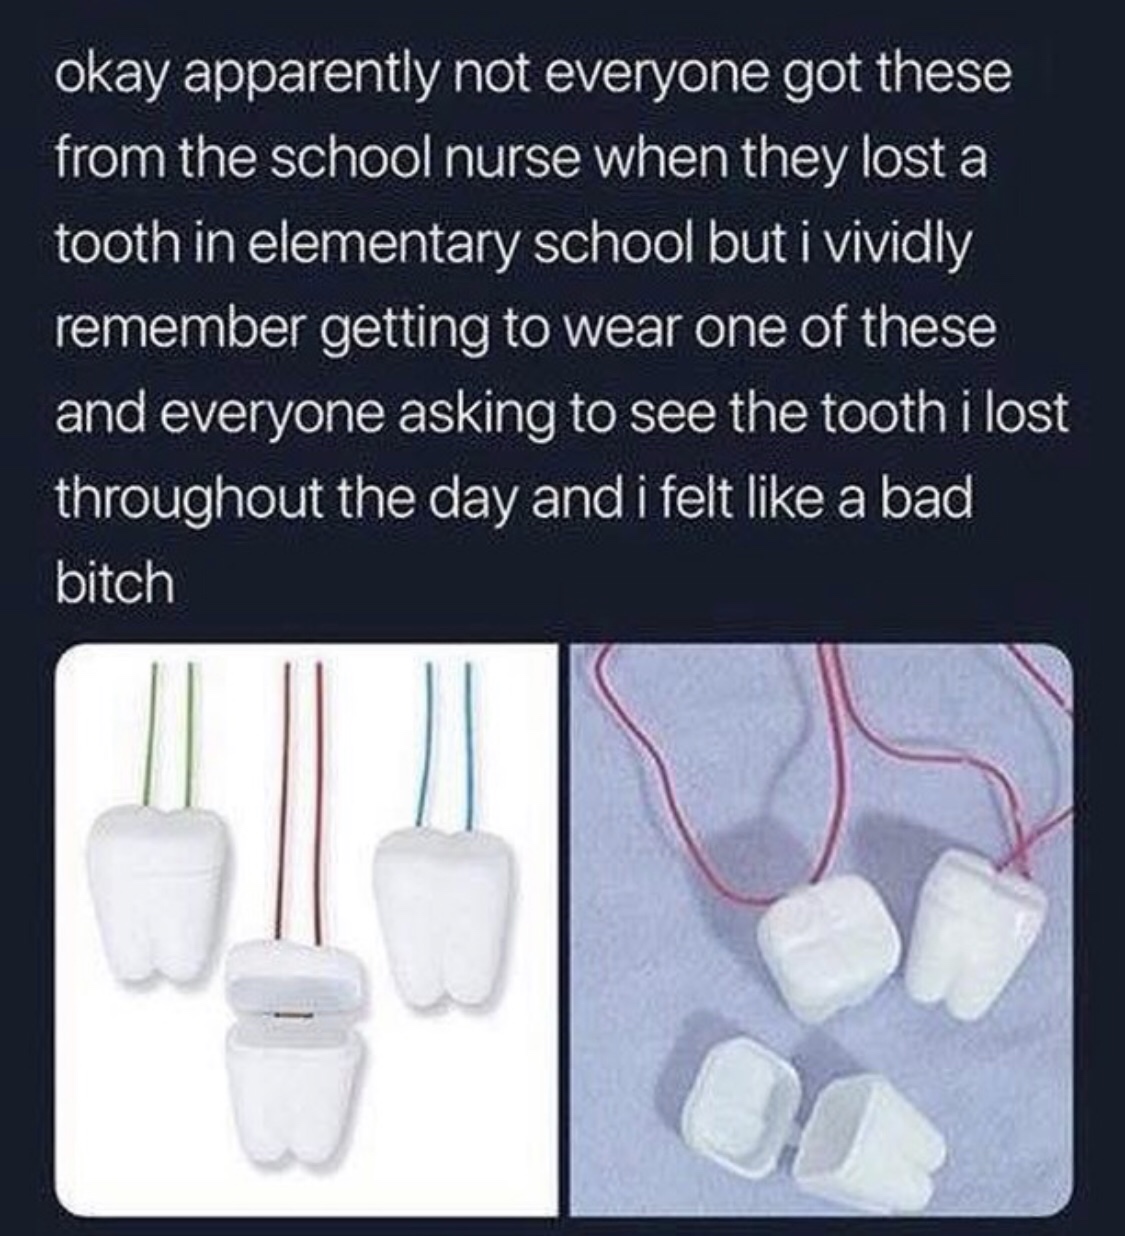 cats in the cradle lyrics - okay apparently not everyone got these from the school nurse when they lost a tooth in elementary school but i vividly remember getting to wear one of these and everyone asking to see the tooth i lost throughout the day and i f